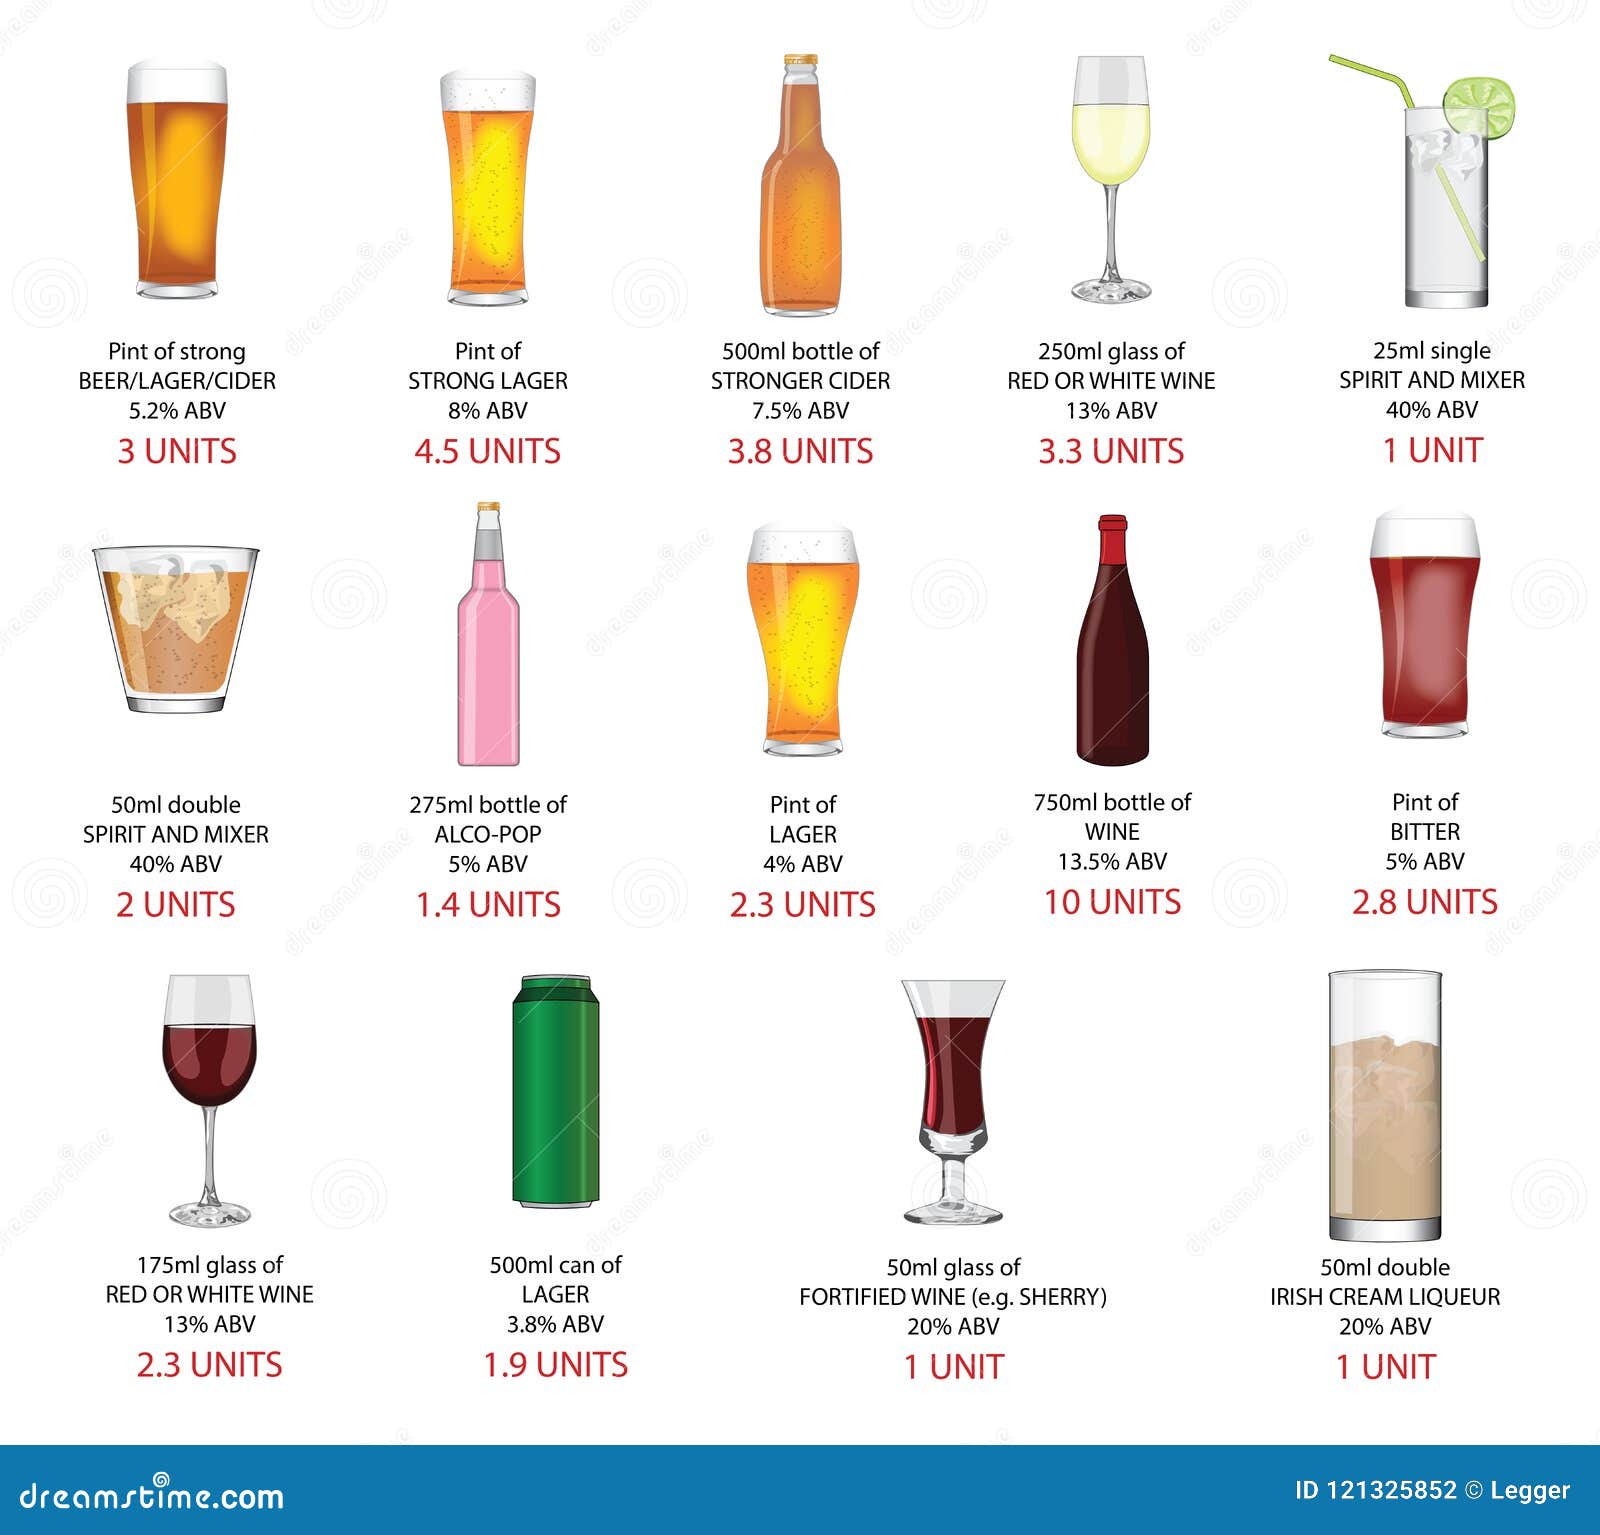 American Alcohol Content Chart